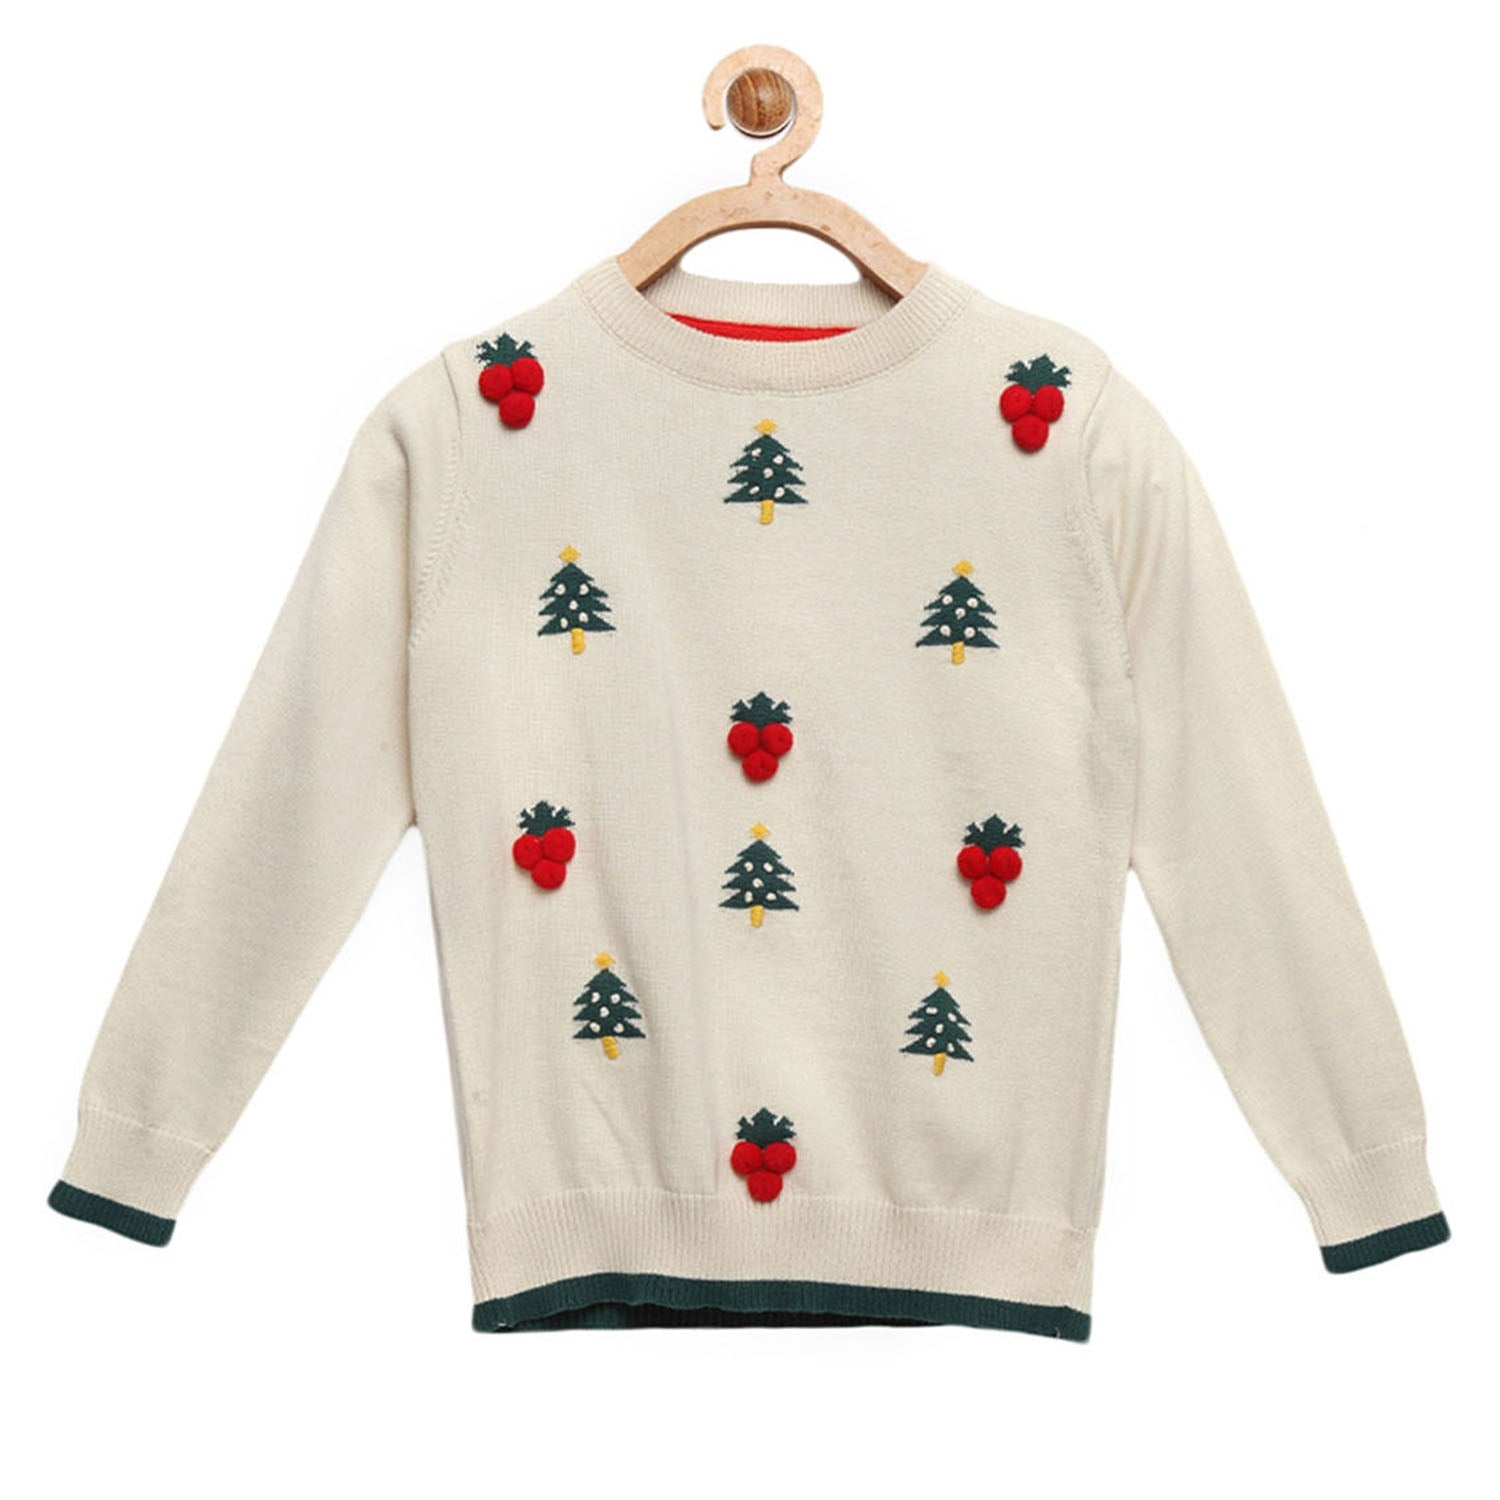 Knitted Cherry Sweater for Boys & Girls